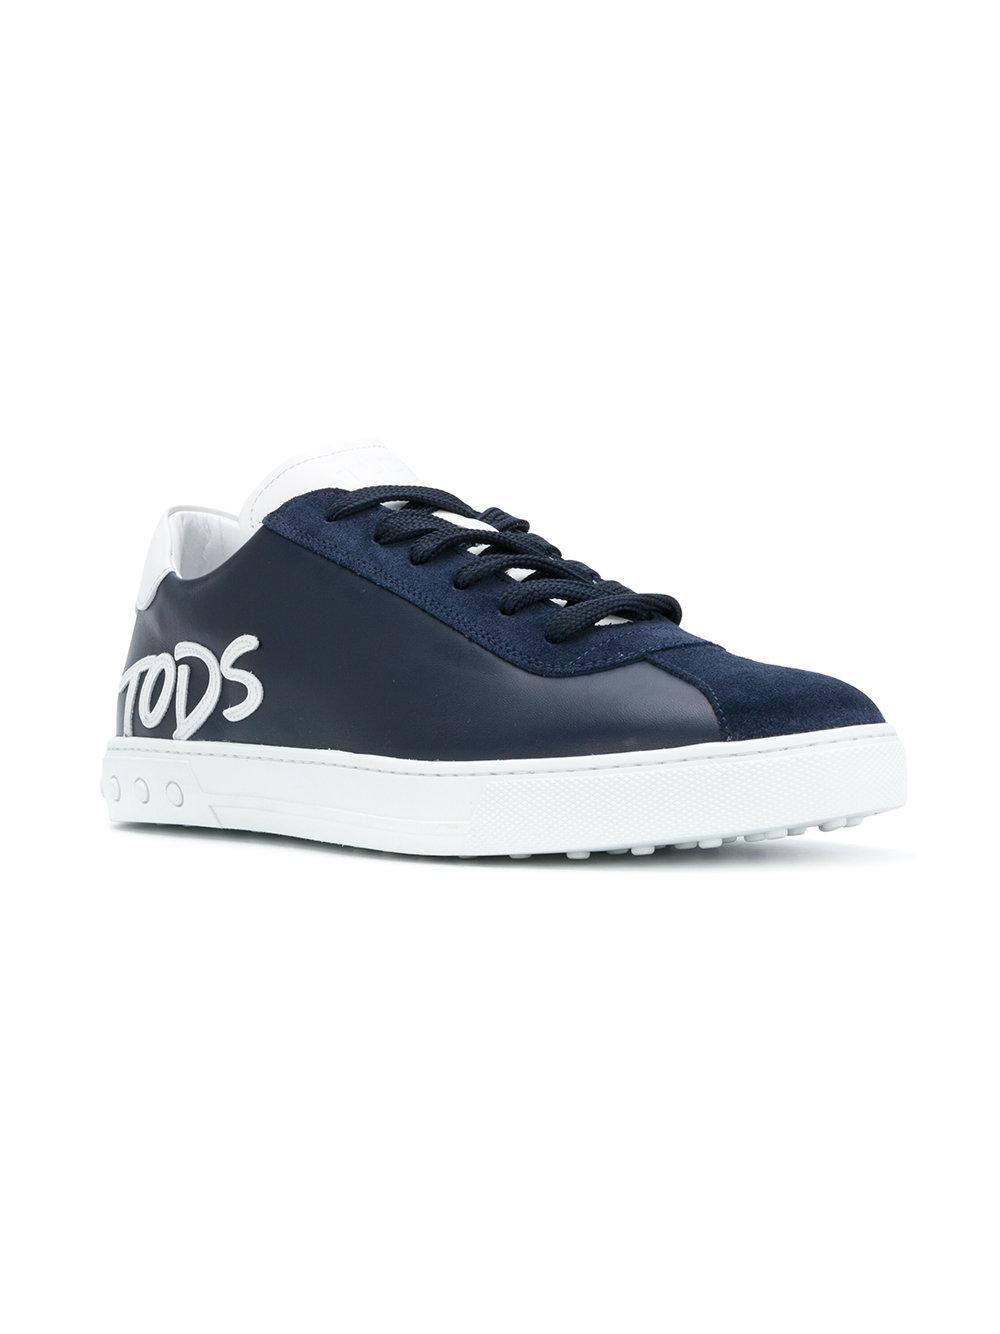 Tod's Logo - Lyst - Tod's Logo-appliqué Lace-up Sneakers in Blue for Men - Save ...